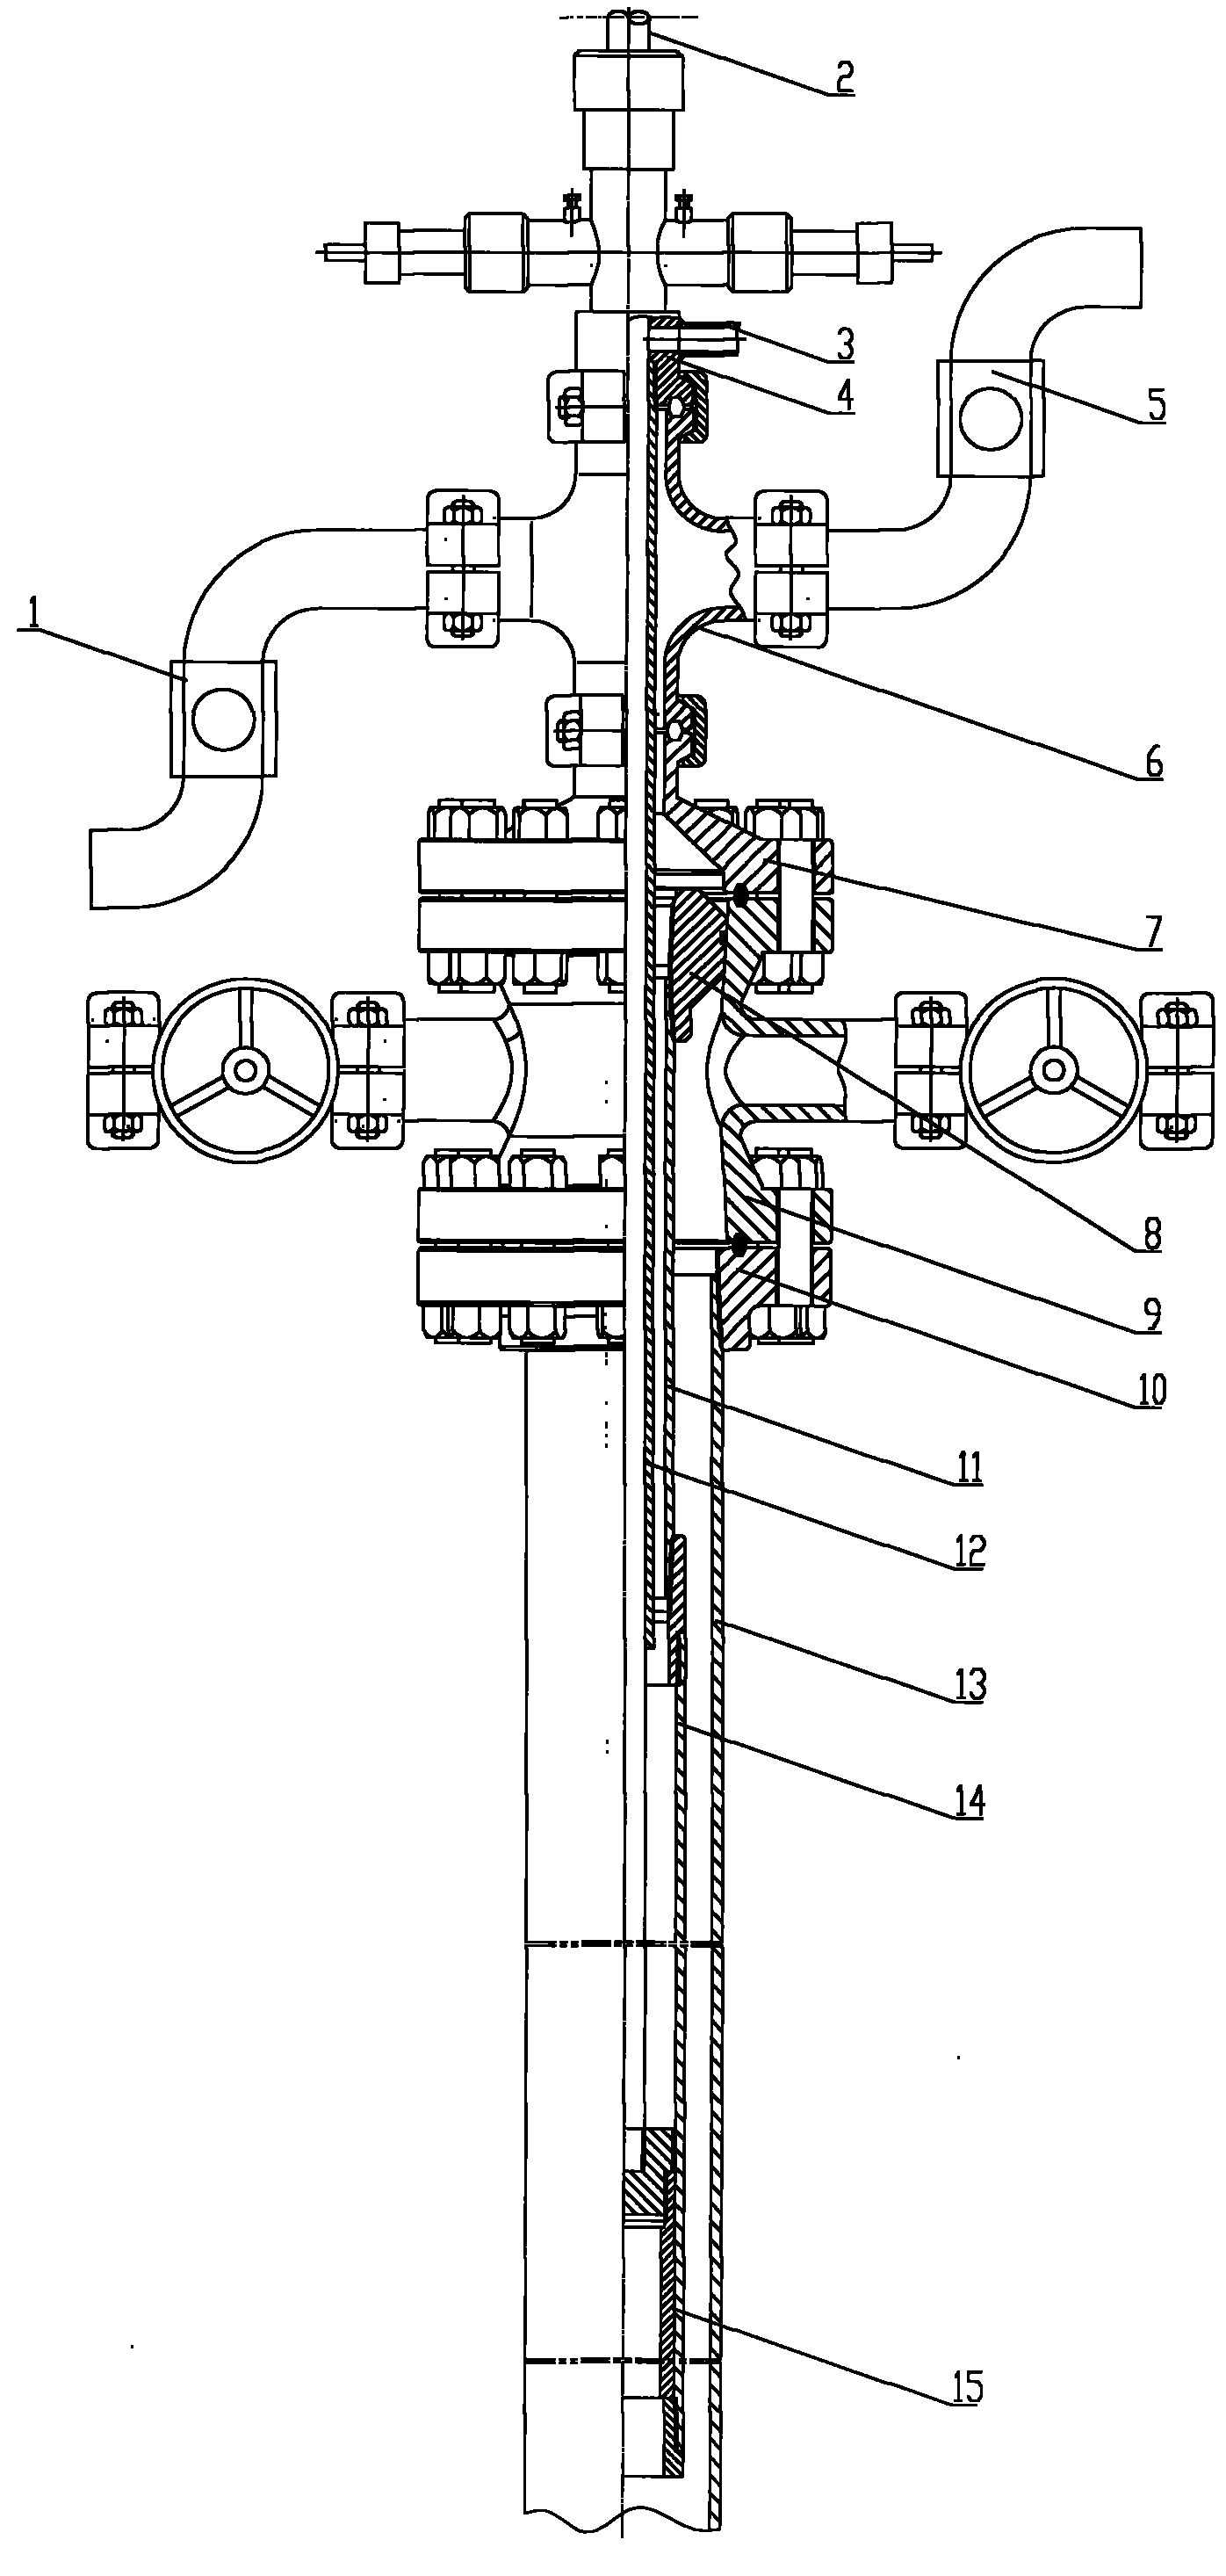 Pressurized water injection device